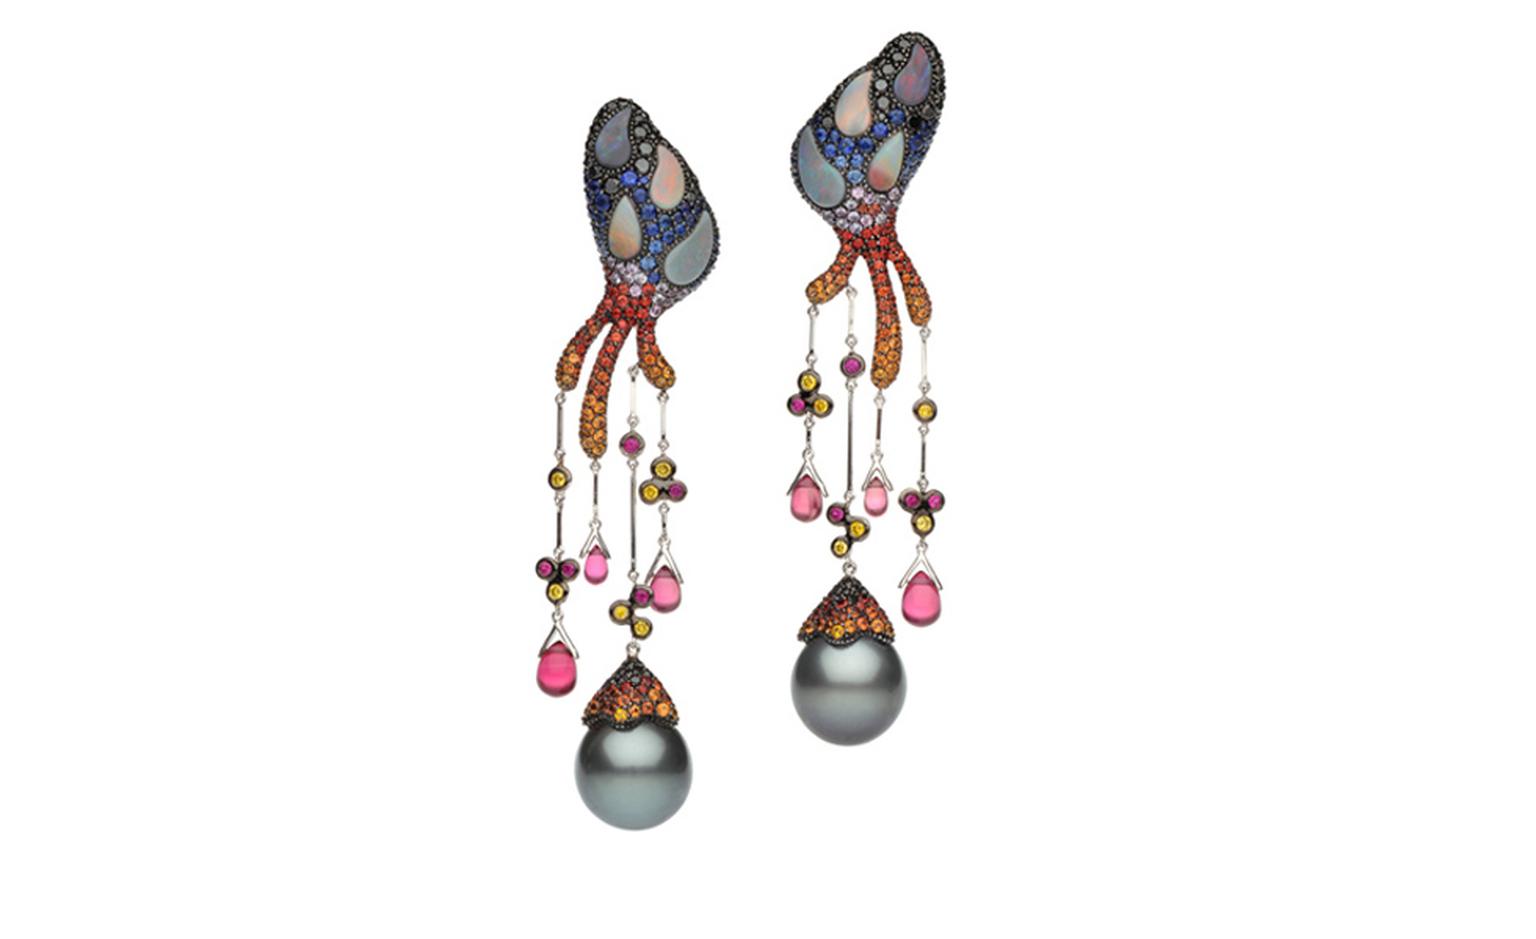 Autore, Fire & Ice Santorini Earrings in white and rose gold with Tahitian South Sea pearls, black and yellow diamonds, purple, blue, yellow and orange sapphires, pink tourmaline and black opal. $55,000 AUD